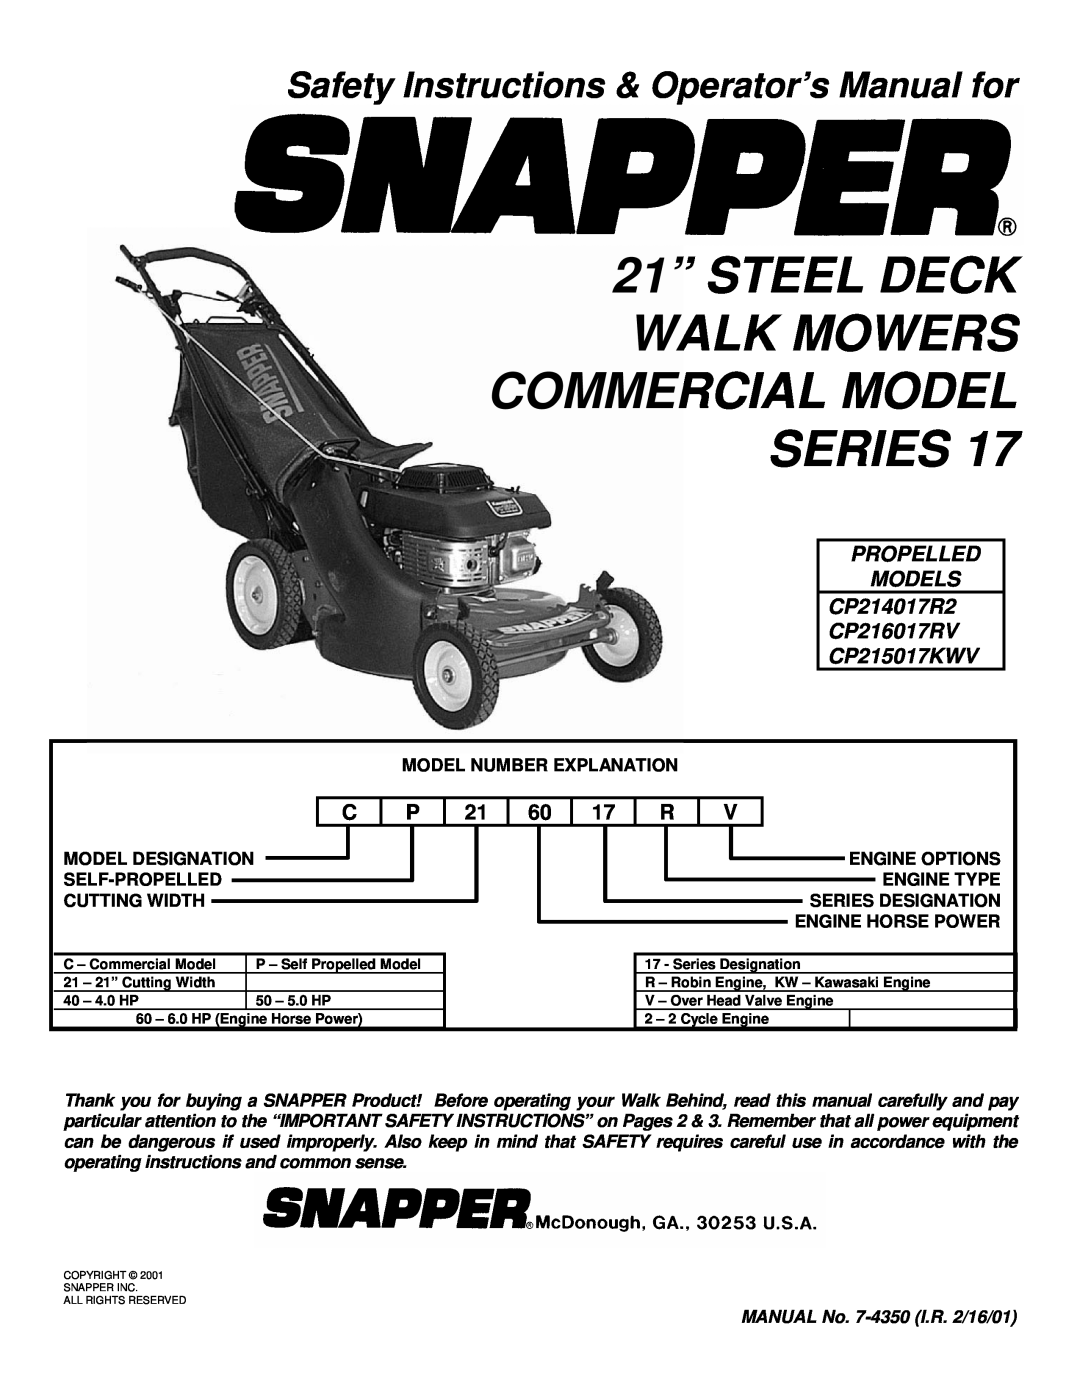 Snapper CP216017RV, CP215017KWV, CP215017HV, CP215517HV, CP215017KWV, CP216017RV, CP214017R2 important safety instructions 